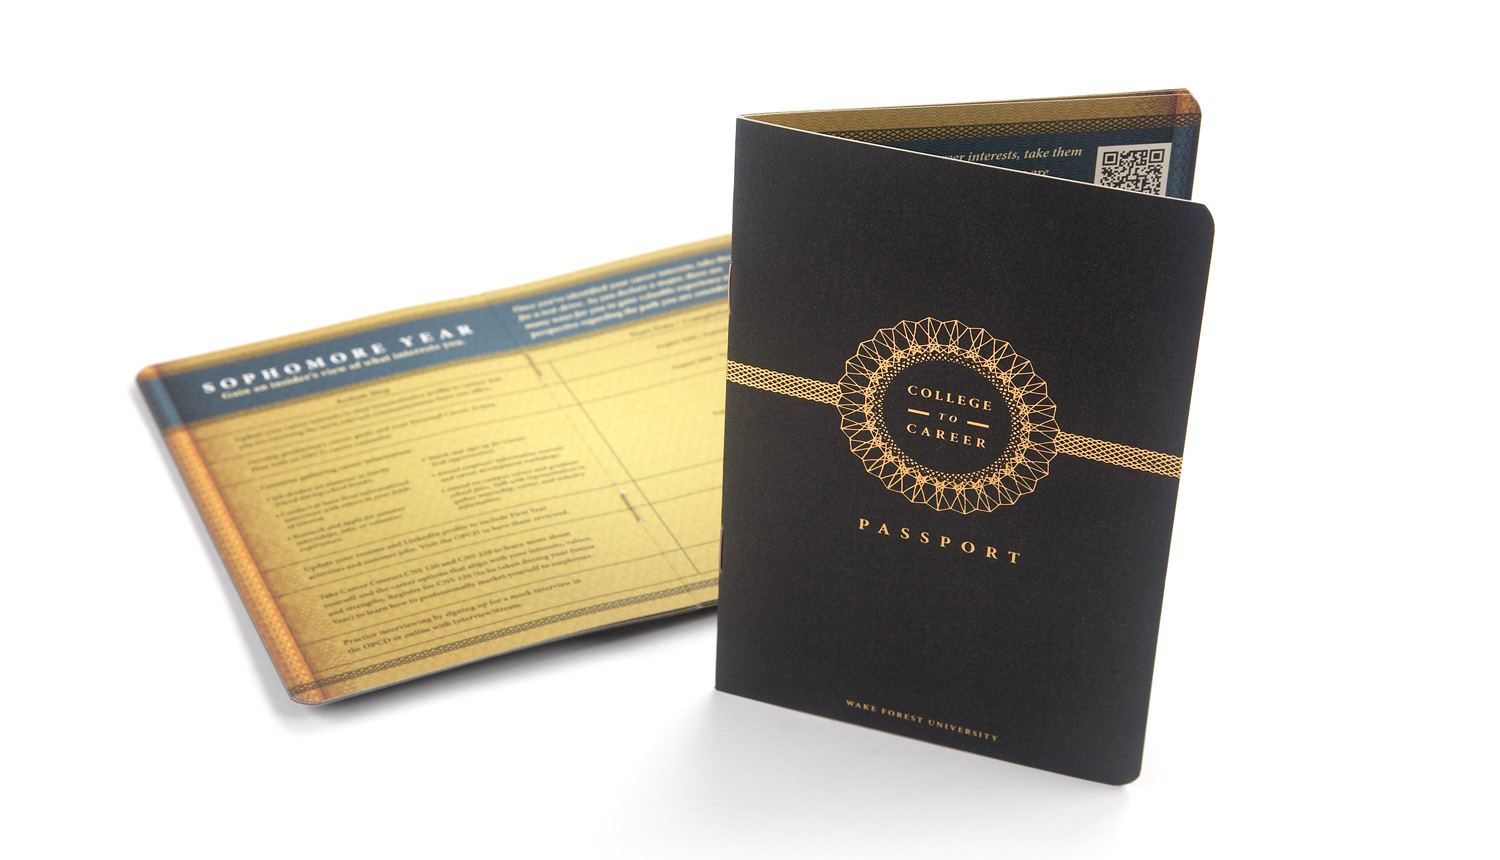  STUDENT PASSPORT  Each newly enrolled student receives this passport to help guide them successfully through each year of college and into their prospective career.   Brochure  